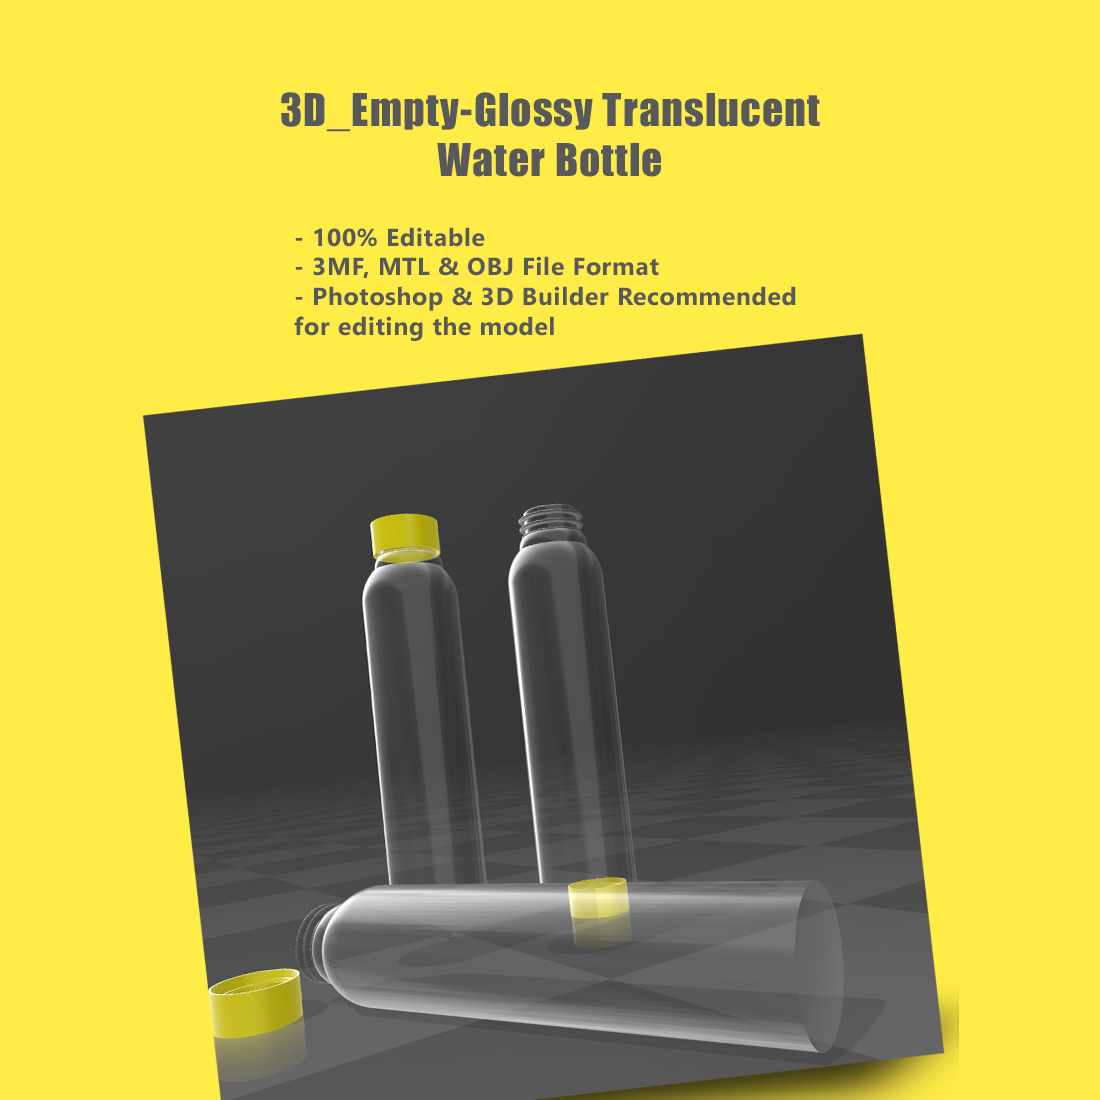 3D Empty Glossy Translucent Water Bottle cover image.